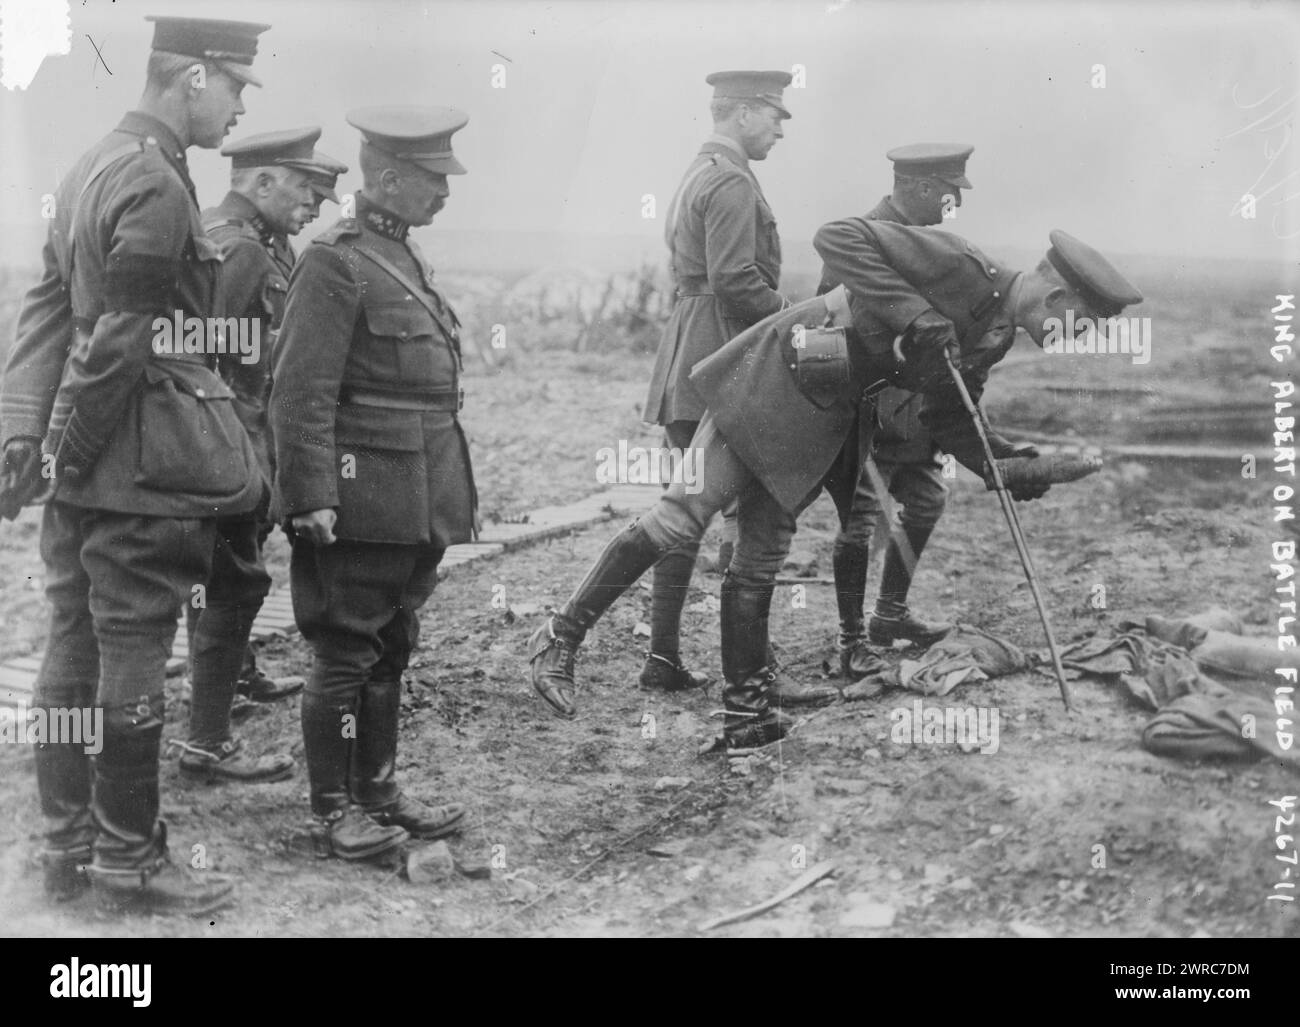 King Albert on Battle Field, Photograph shows an aide-de-camp of King Albert I of Belgium picking up a souvenir on the Somme battlefield near Pozieres, France, May 16, 1917. King Albert I and General Hubert Gough, the British Commander of the Fifth Army stand in background., 1917 May 16, World War, 1914-1918, Glass negatives, 1 negative: glass Stock Photo